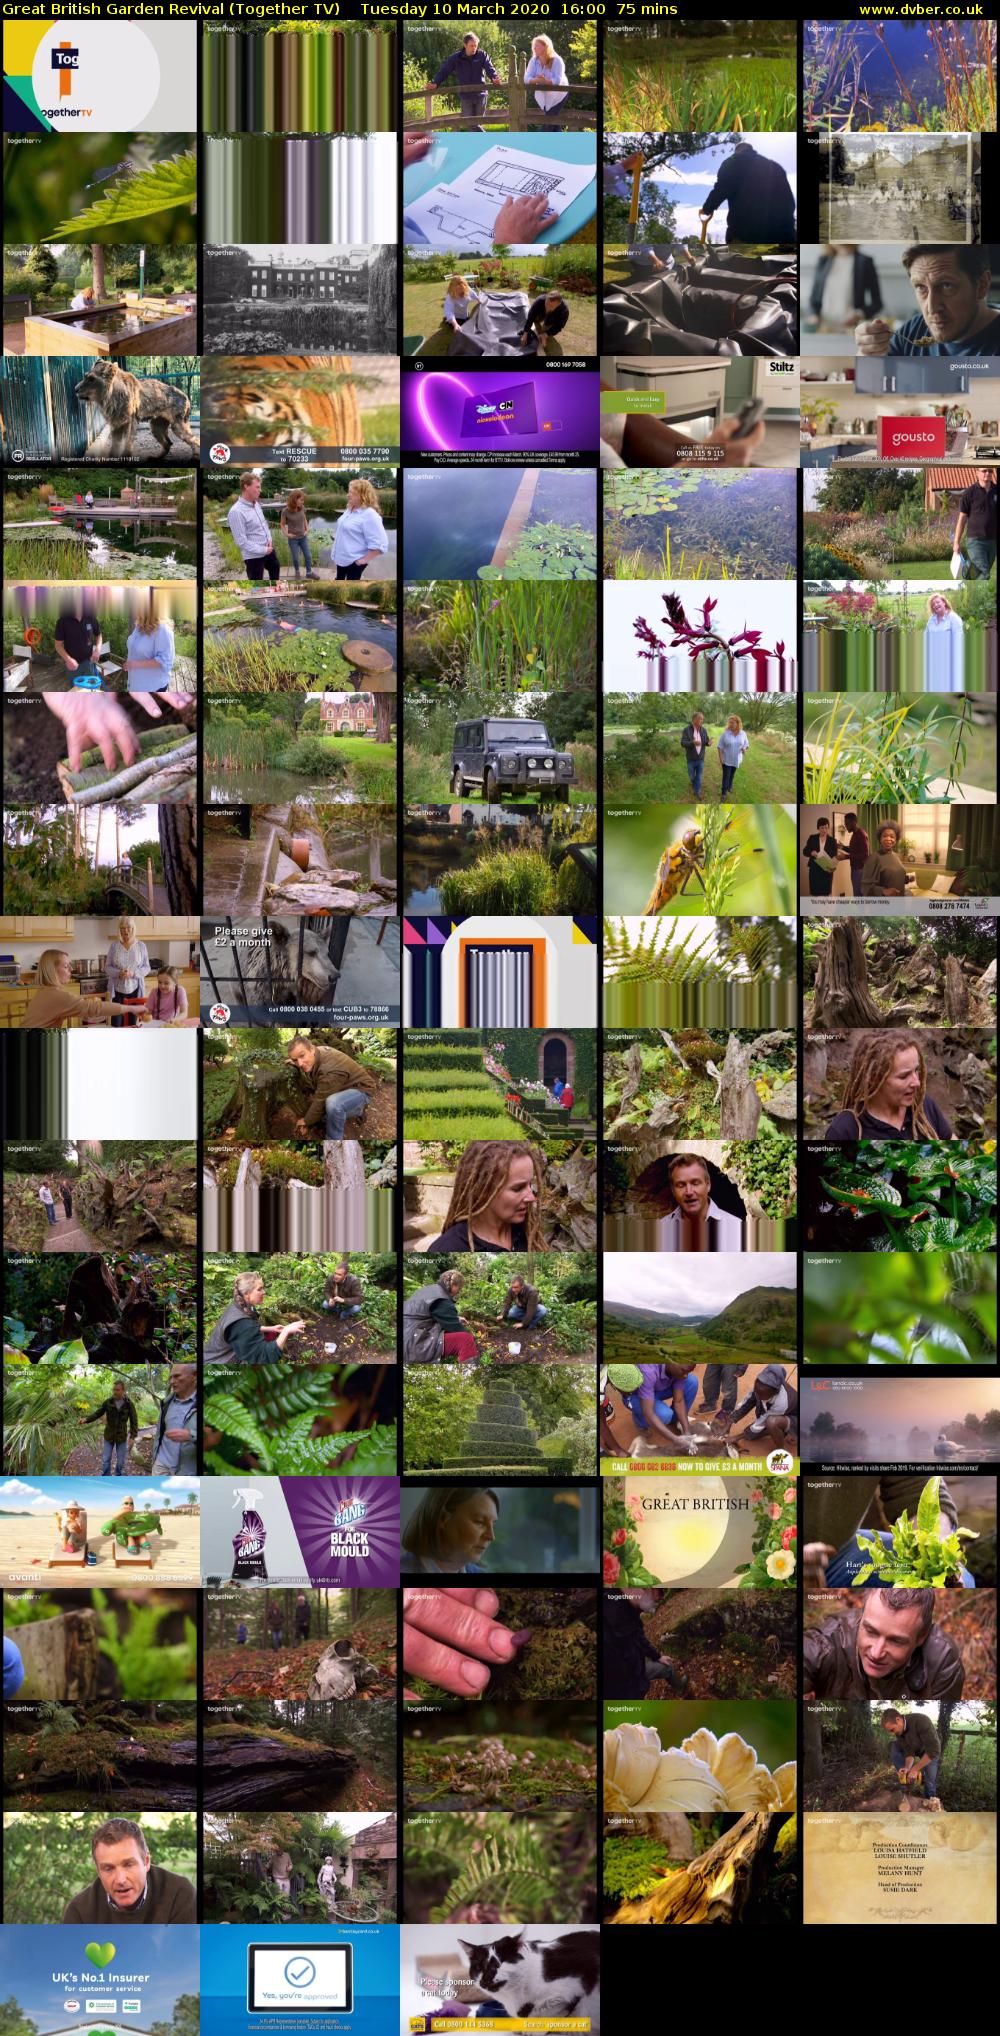 Great British Garden Revival (Together TV) Tuesday 10 March 2020 16:00 - 17:15